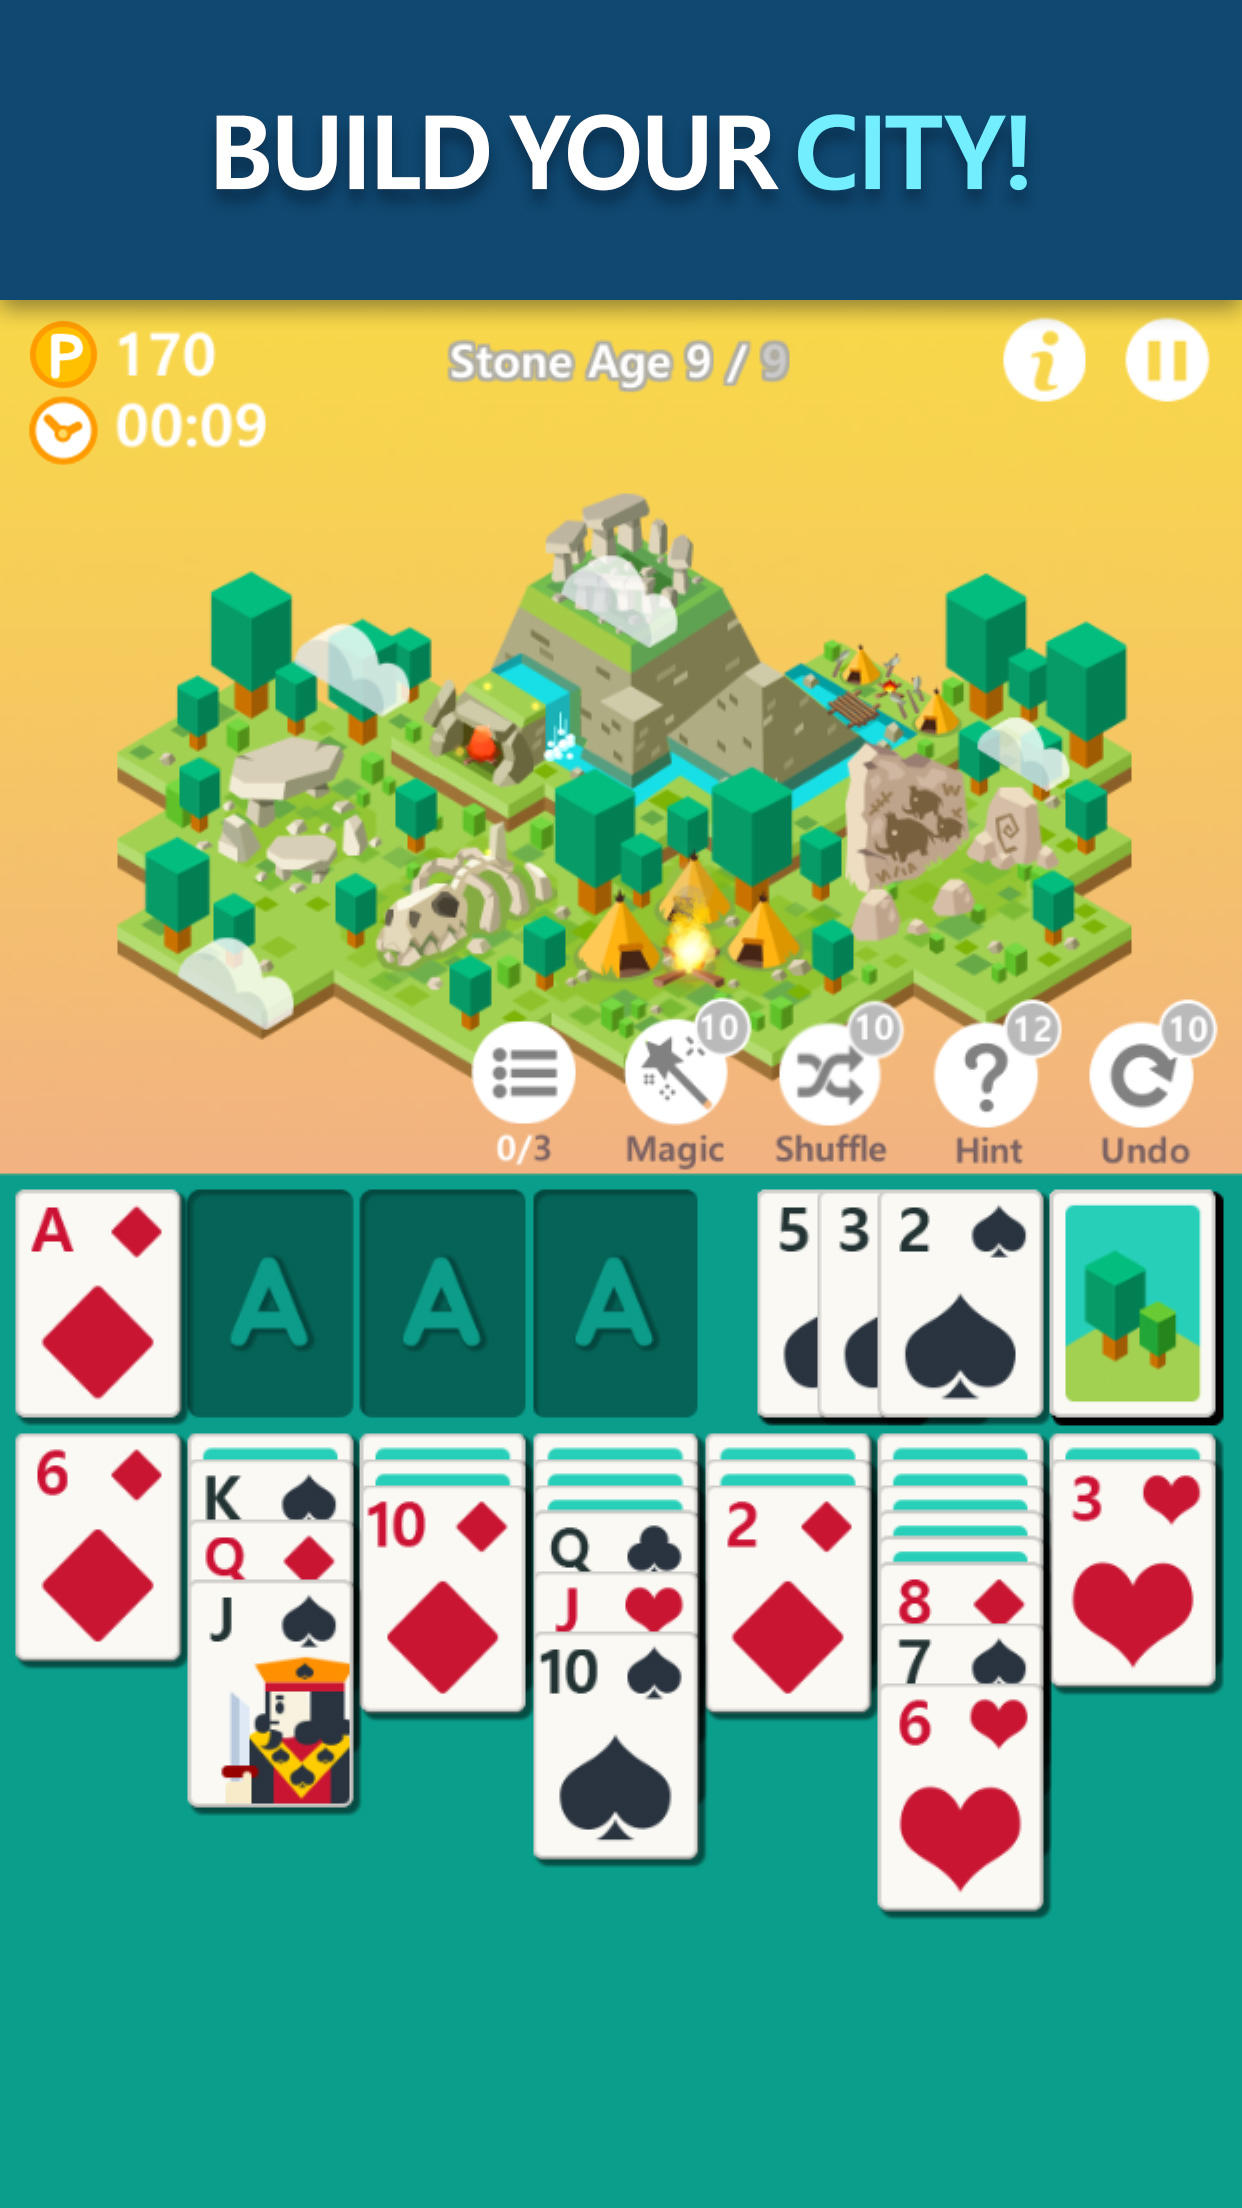 Screenshot 1 of Solitaire : Age of solitaire 1.7.0